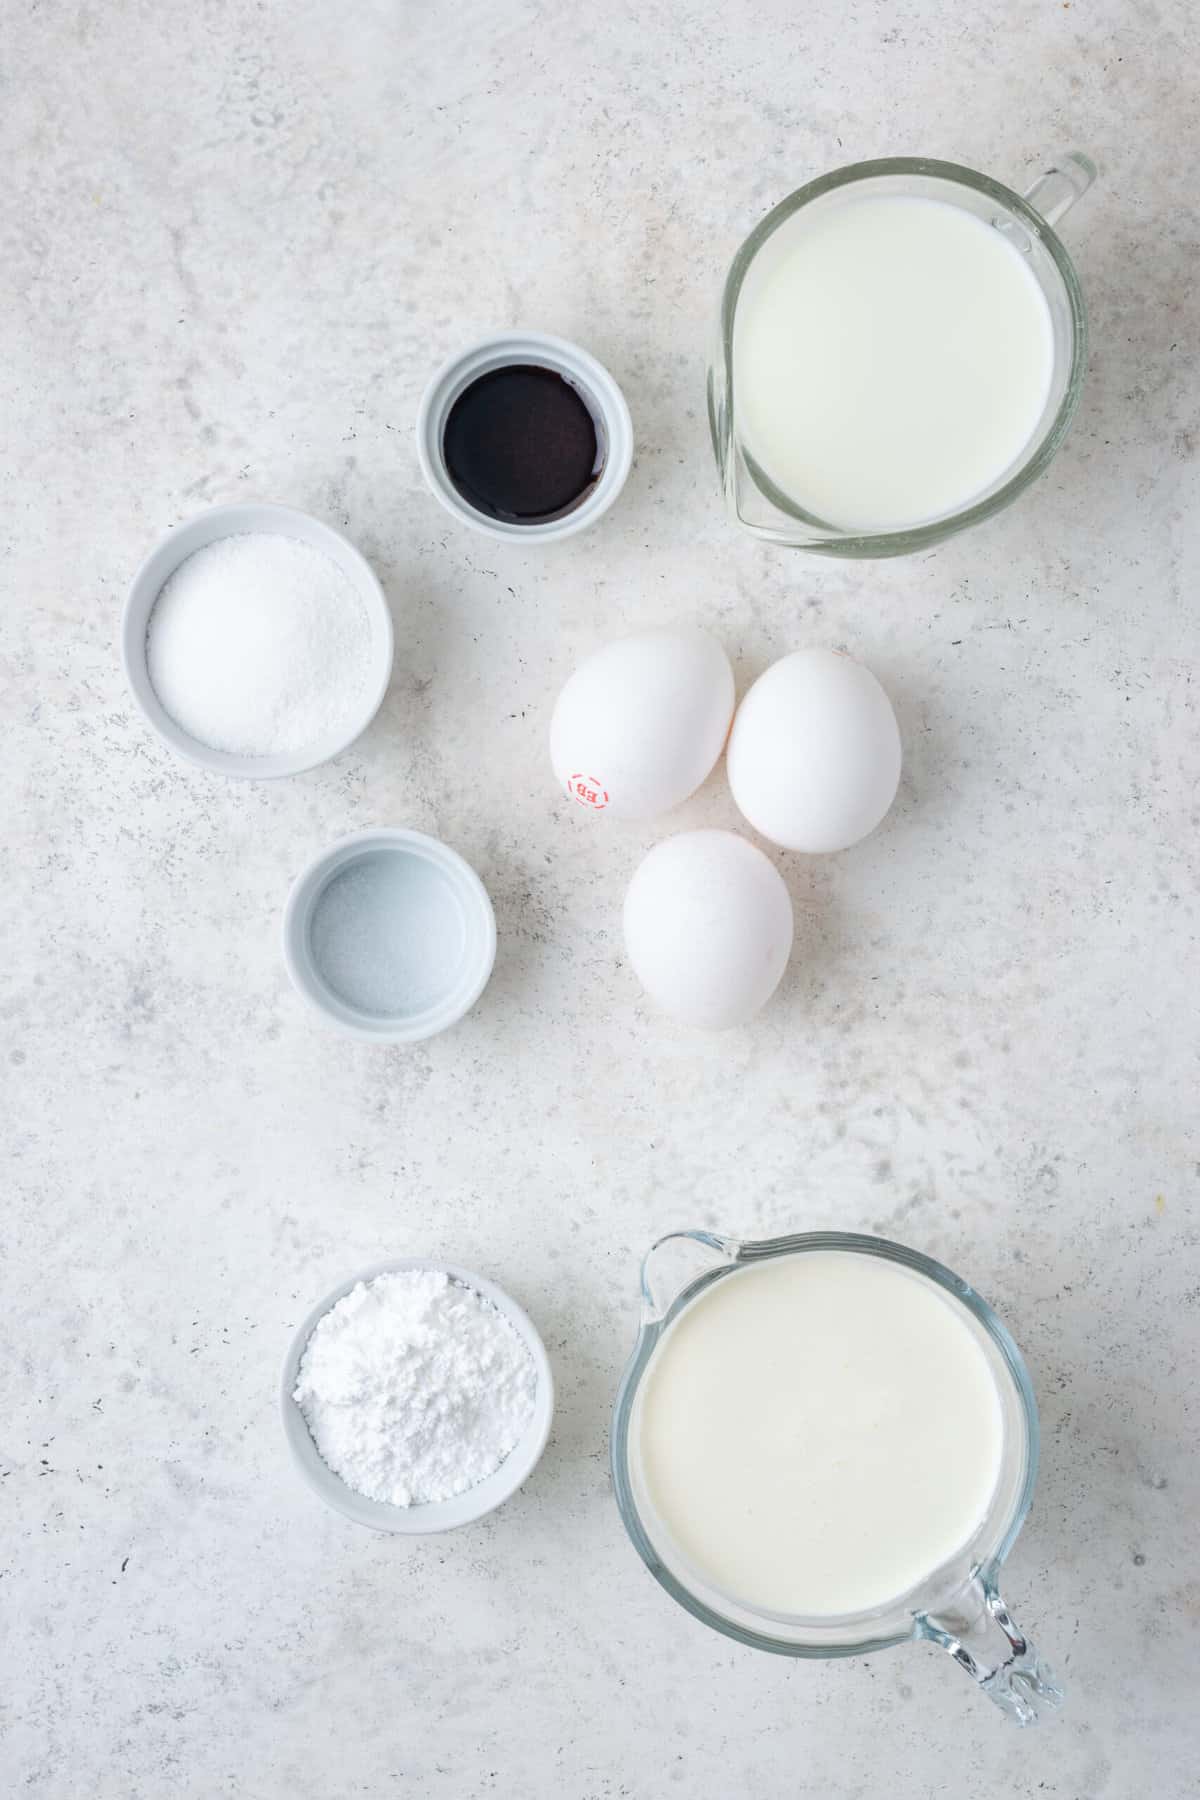 Ingredients needed to make Gluten-Free Bismark Donuts, including eggs, vanilla, and more, are shown in an overhead shot.